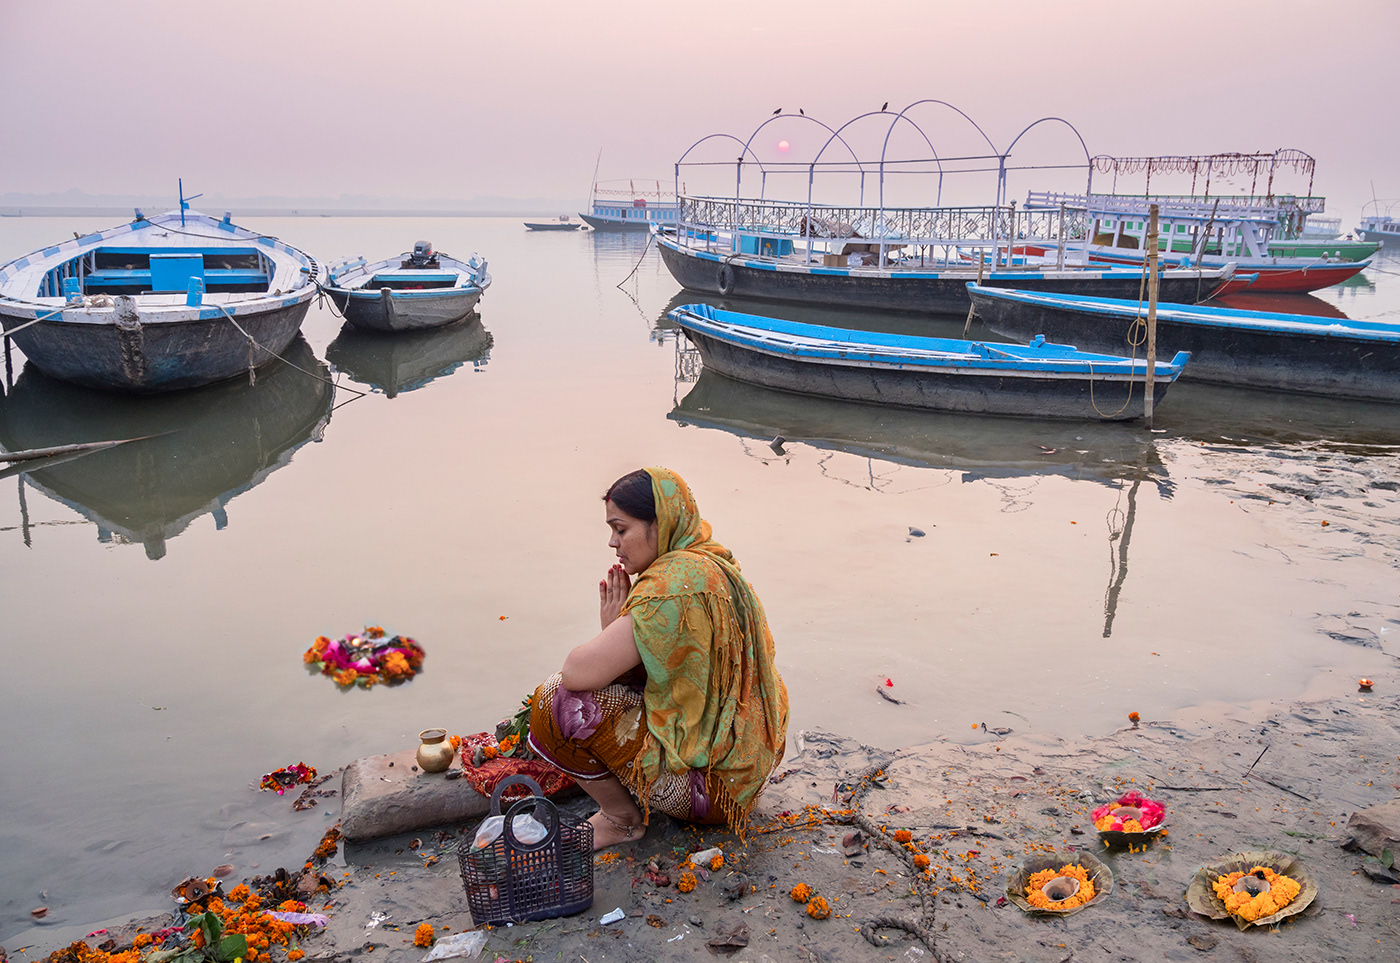 A Hindu worshipper on the Ganges river.